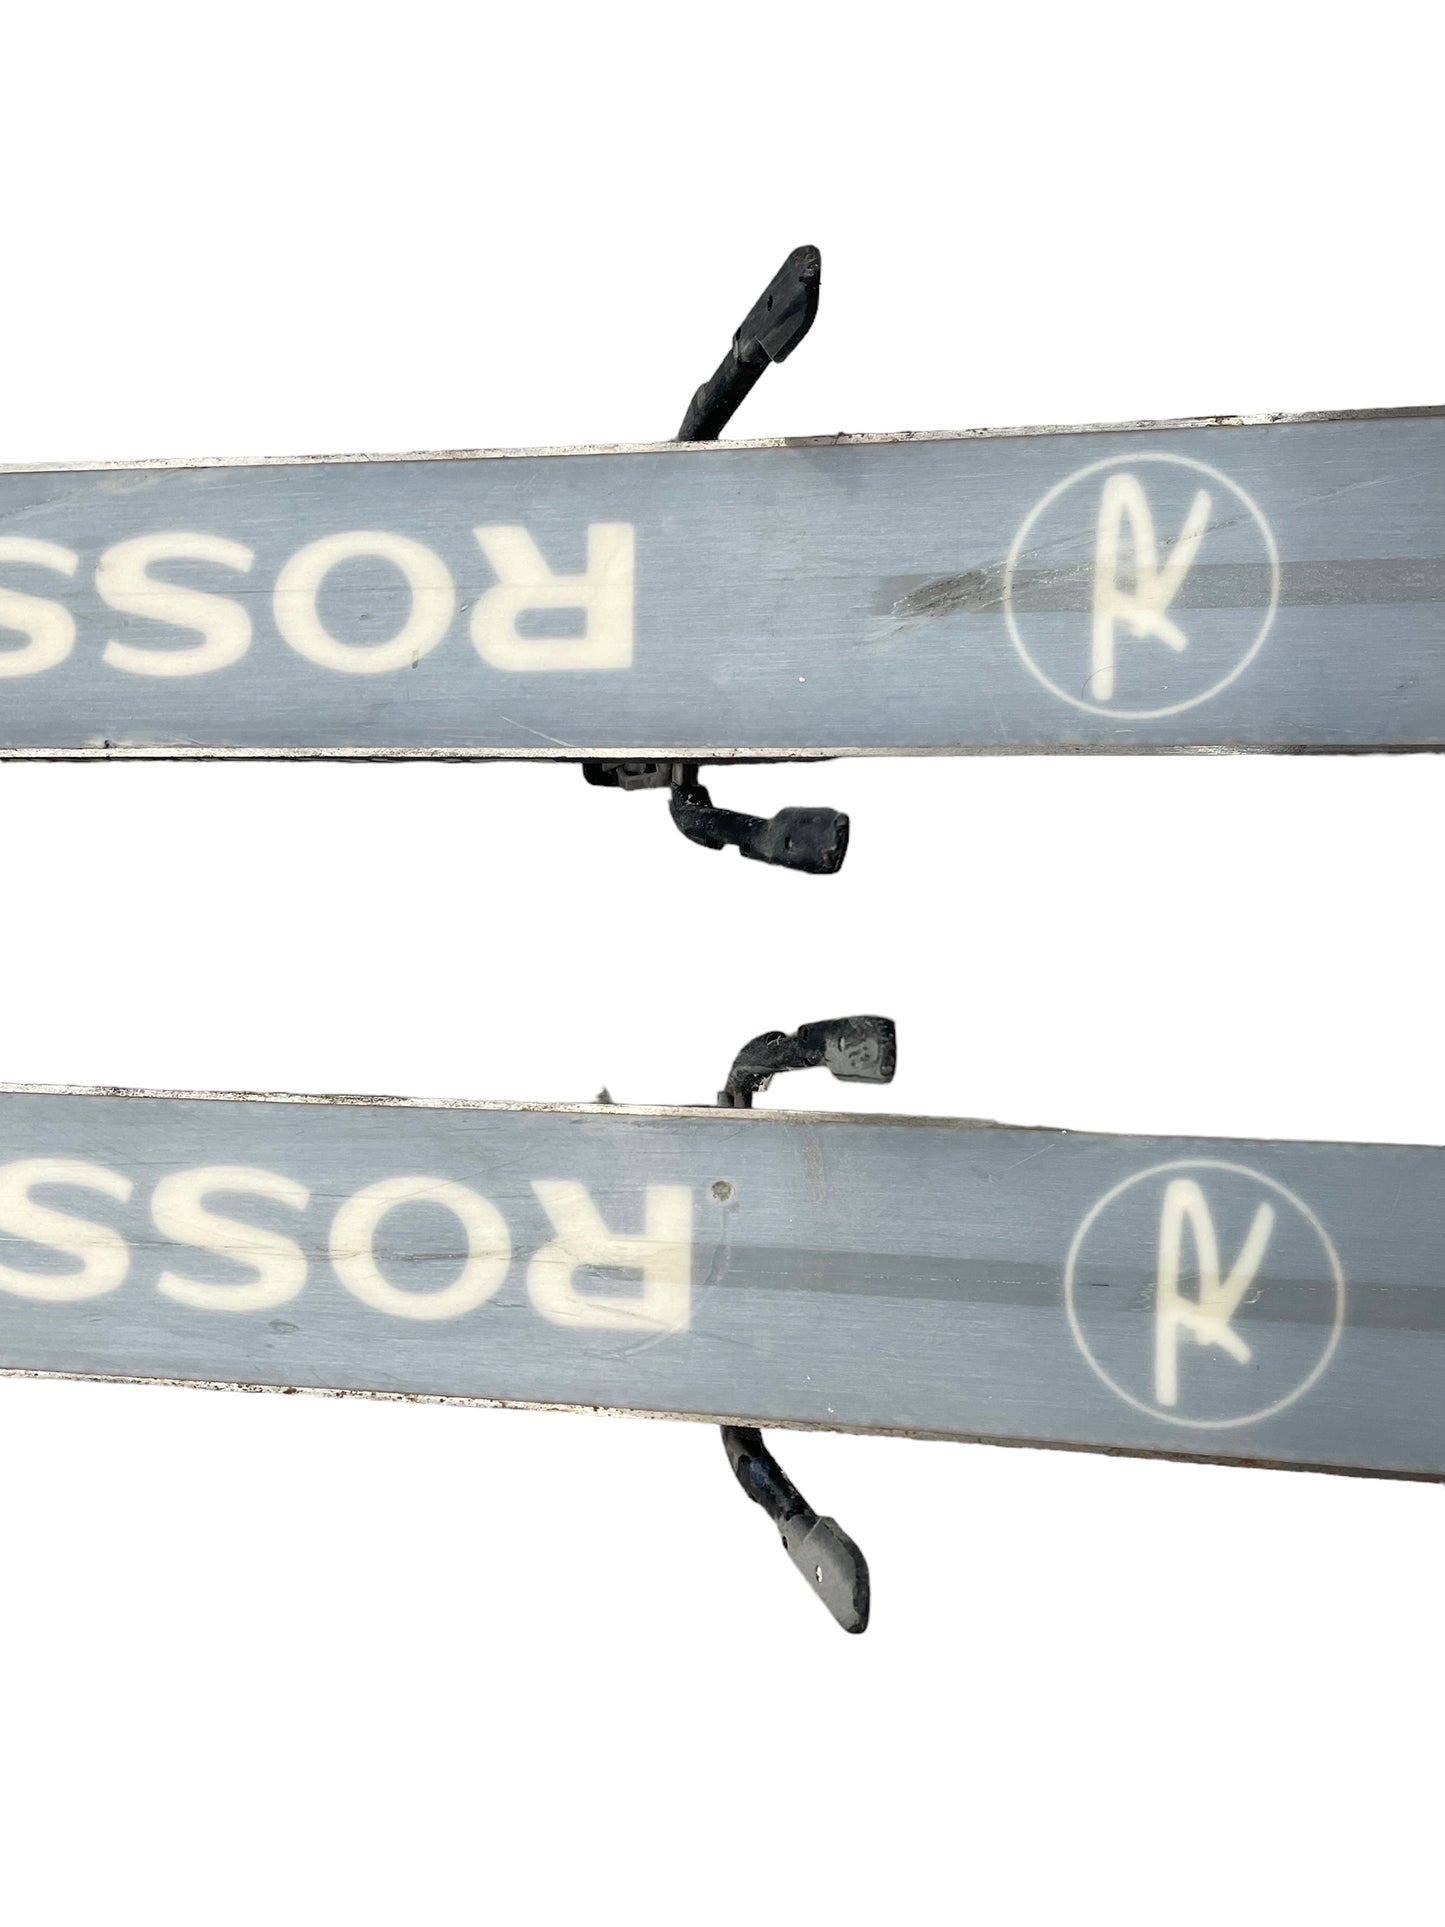 Rossignol FP Competition Skis with Poles (Local Pick-Up Only)